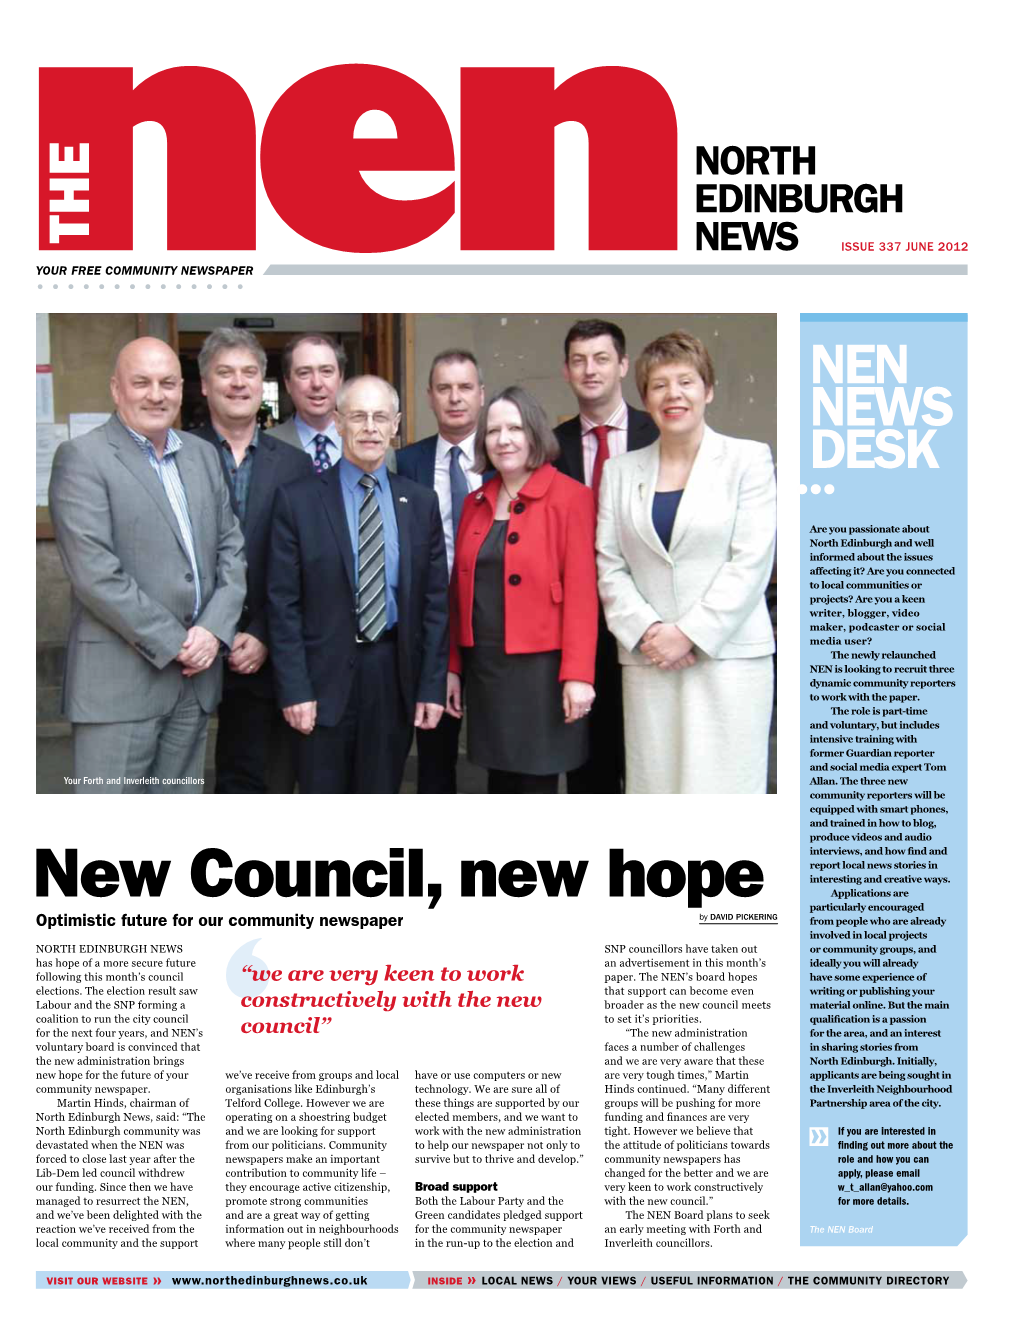 New Council, New Hope